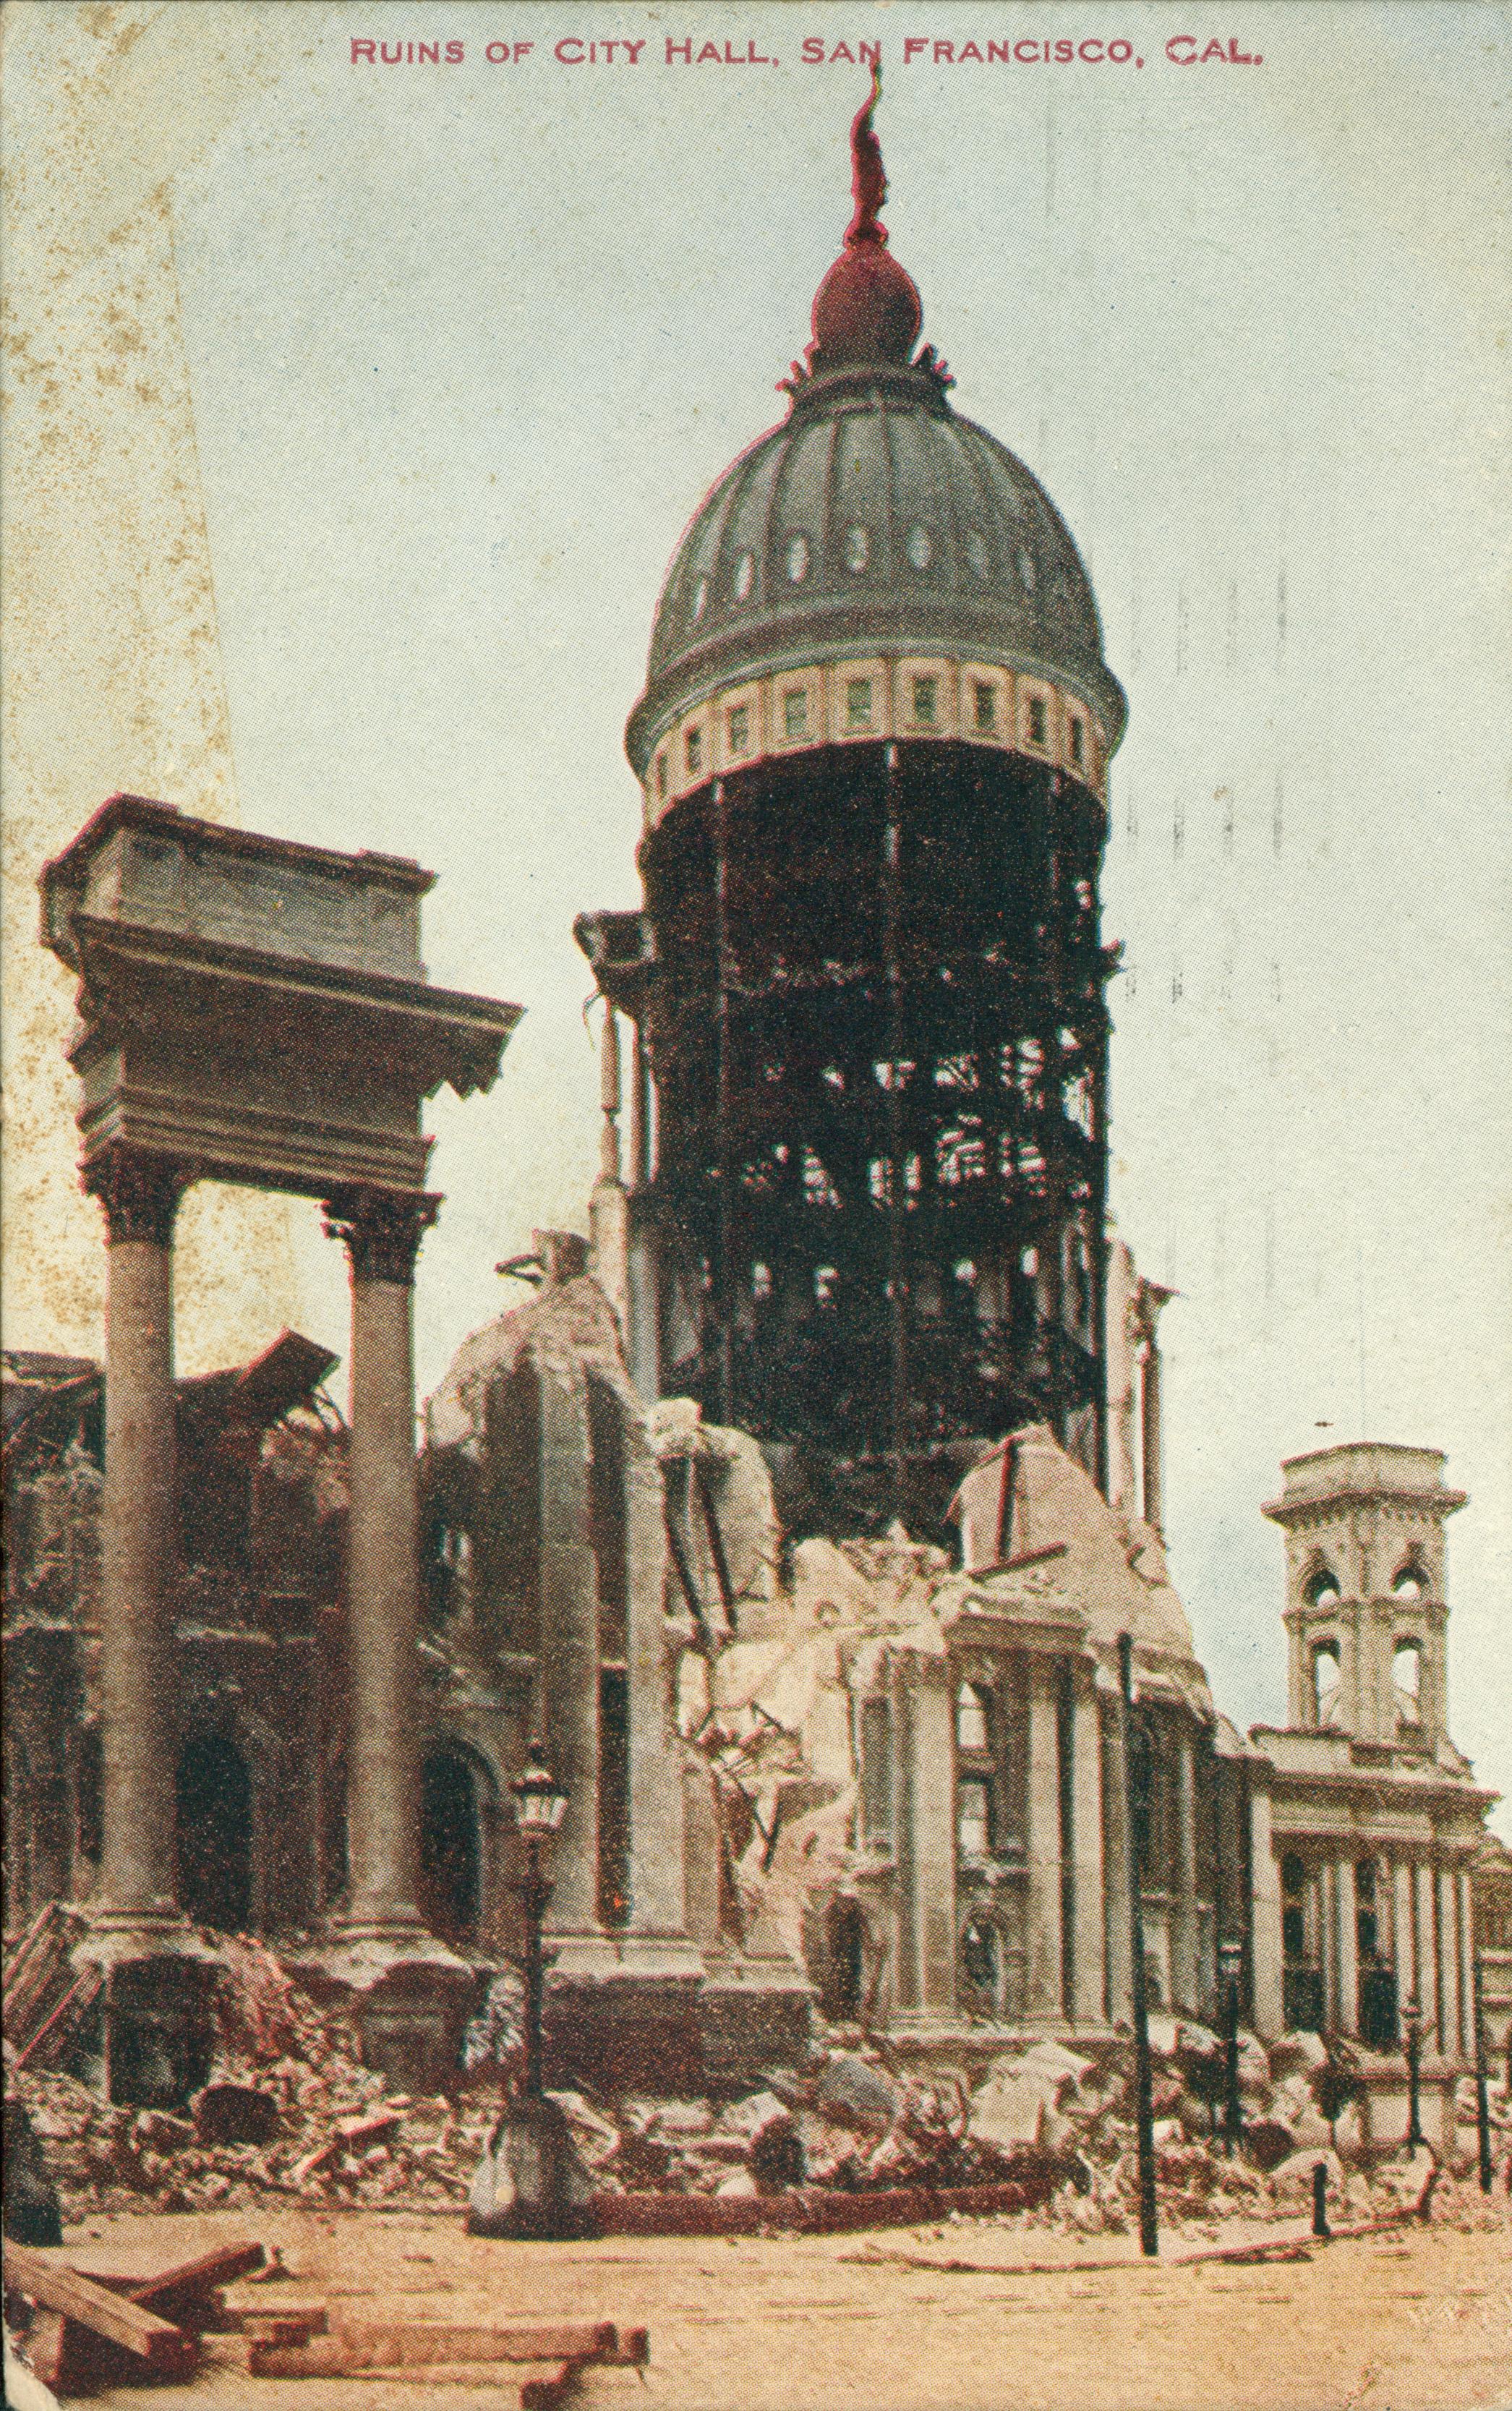 Photo showing the ruins of City Hall.